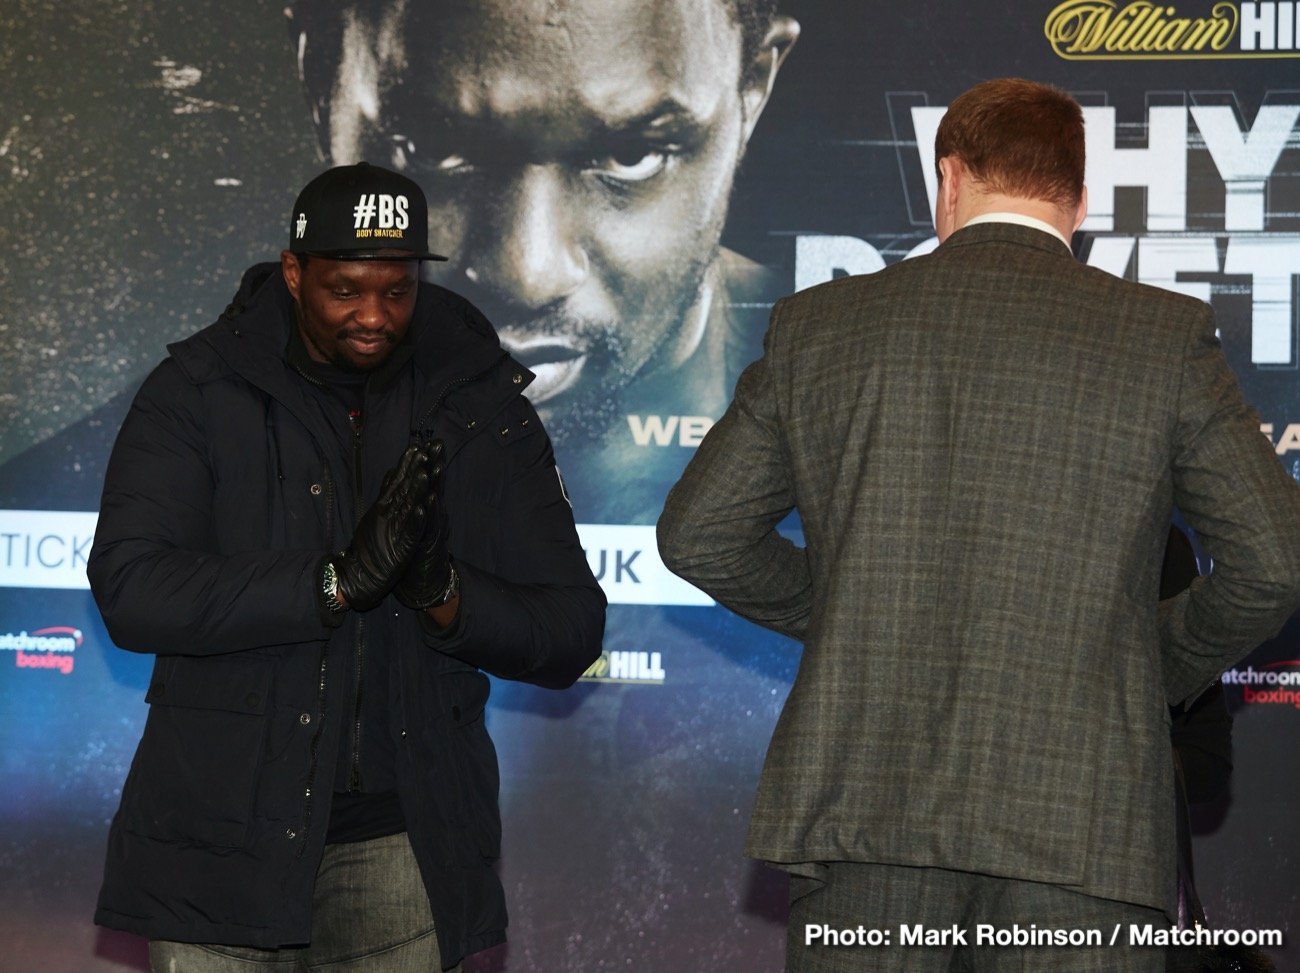 Image: Hearn wants Deontay to step aside to let Whyte face Fury